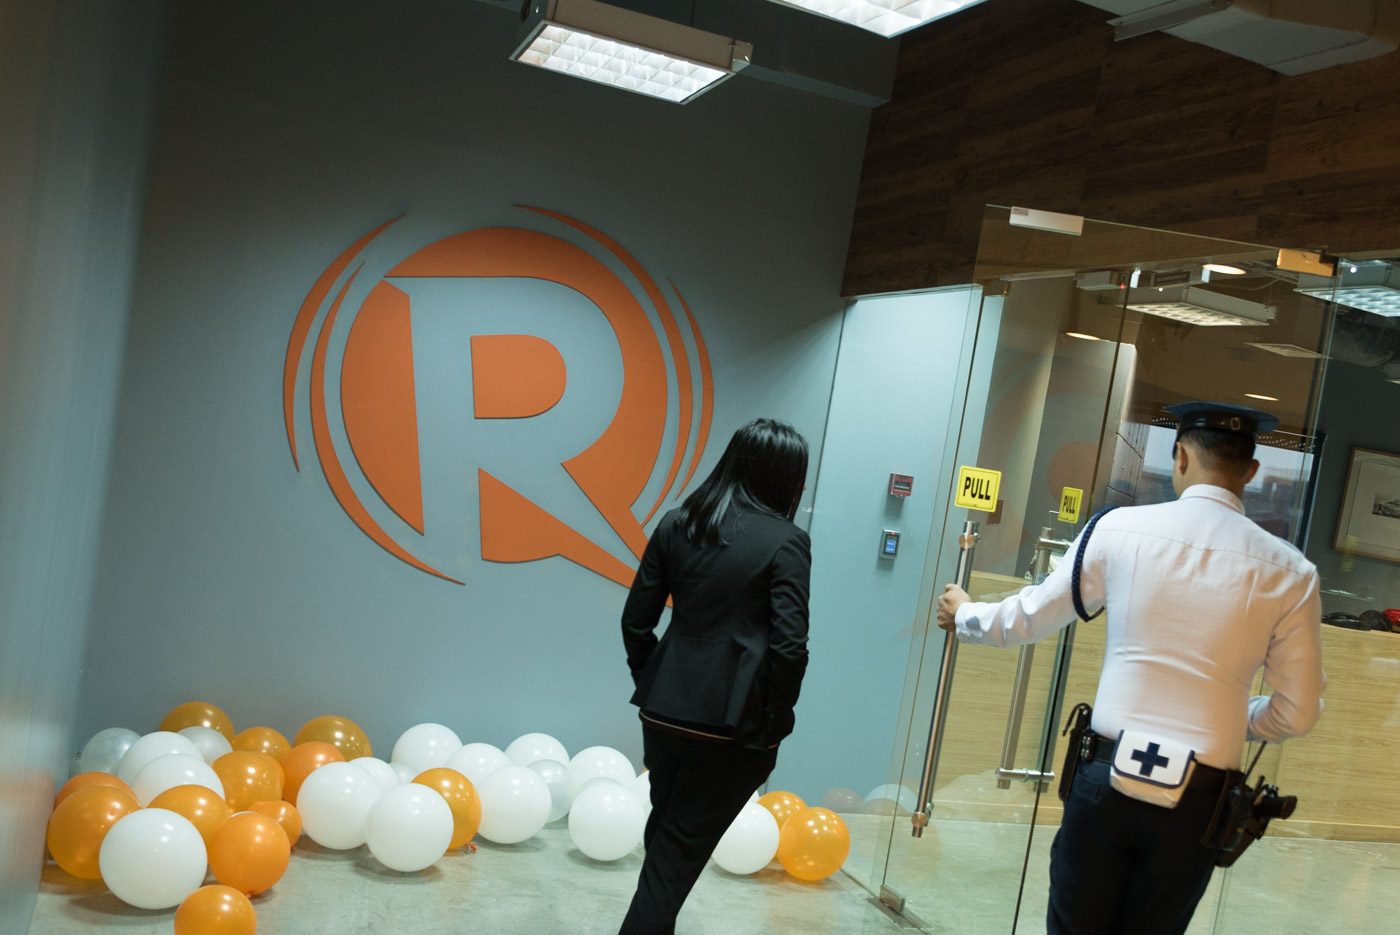 LOOK: How much has Rappler been asked to pay for bail and bonds?